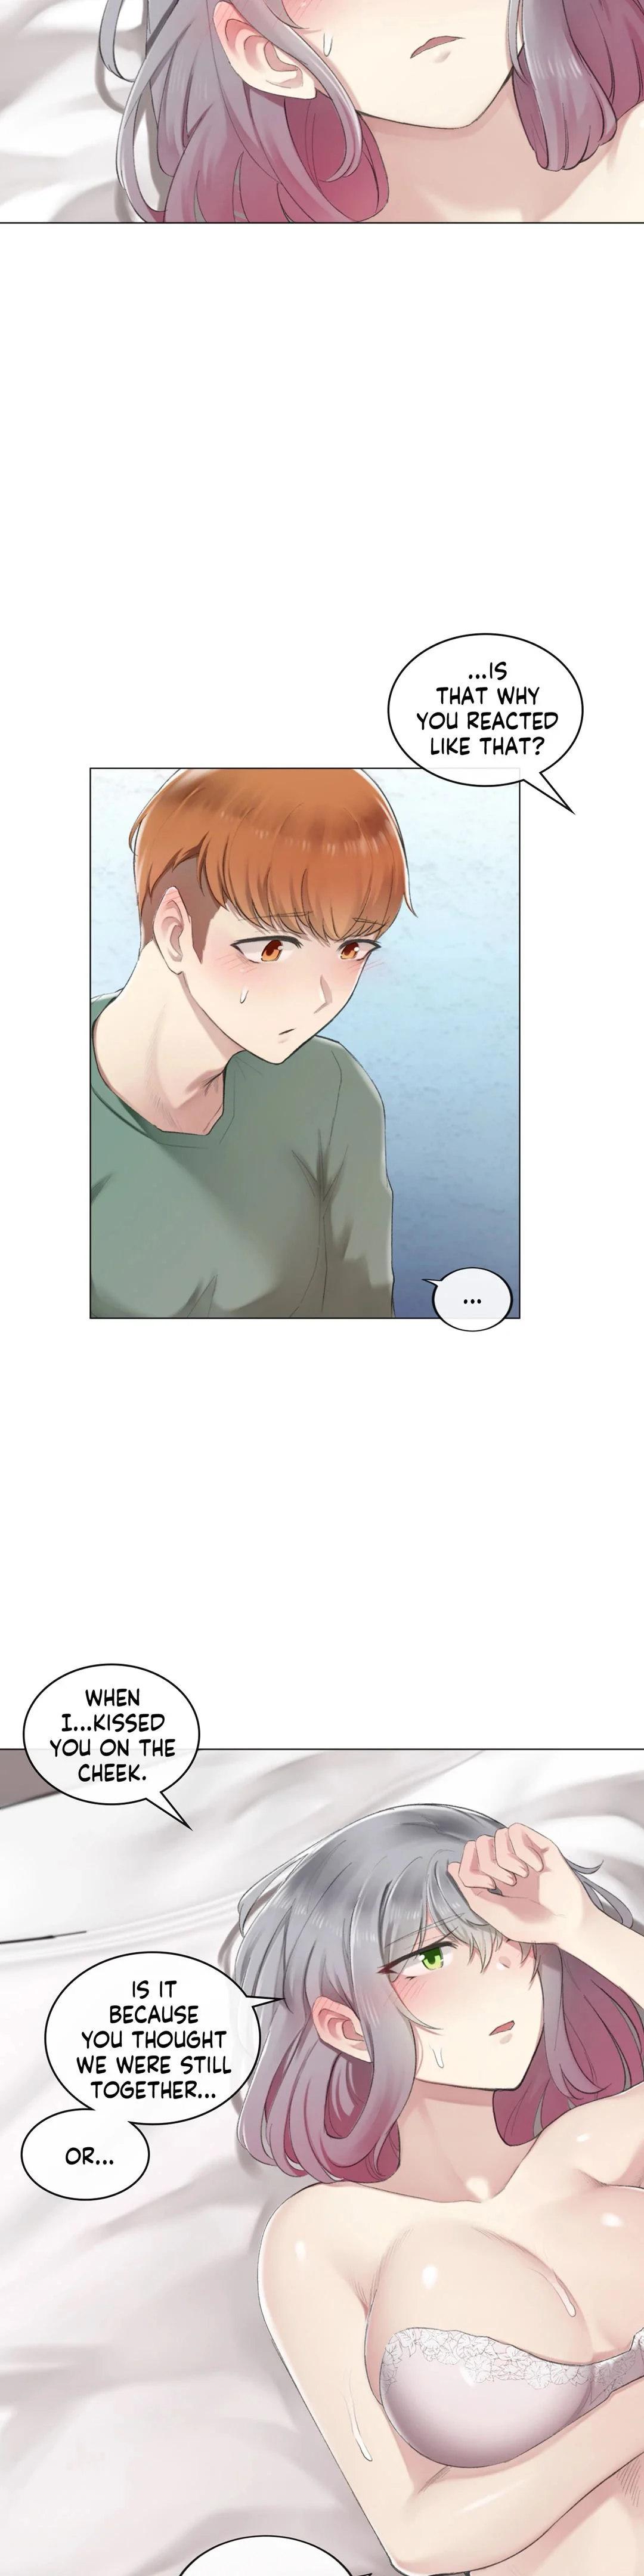 [Dumangoon, KONG_] Sexcape Room: Snap Off Ch.7/7 [English] [Manhwa PDF] Completed 93